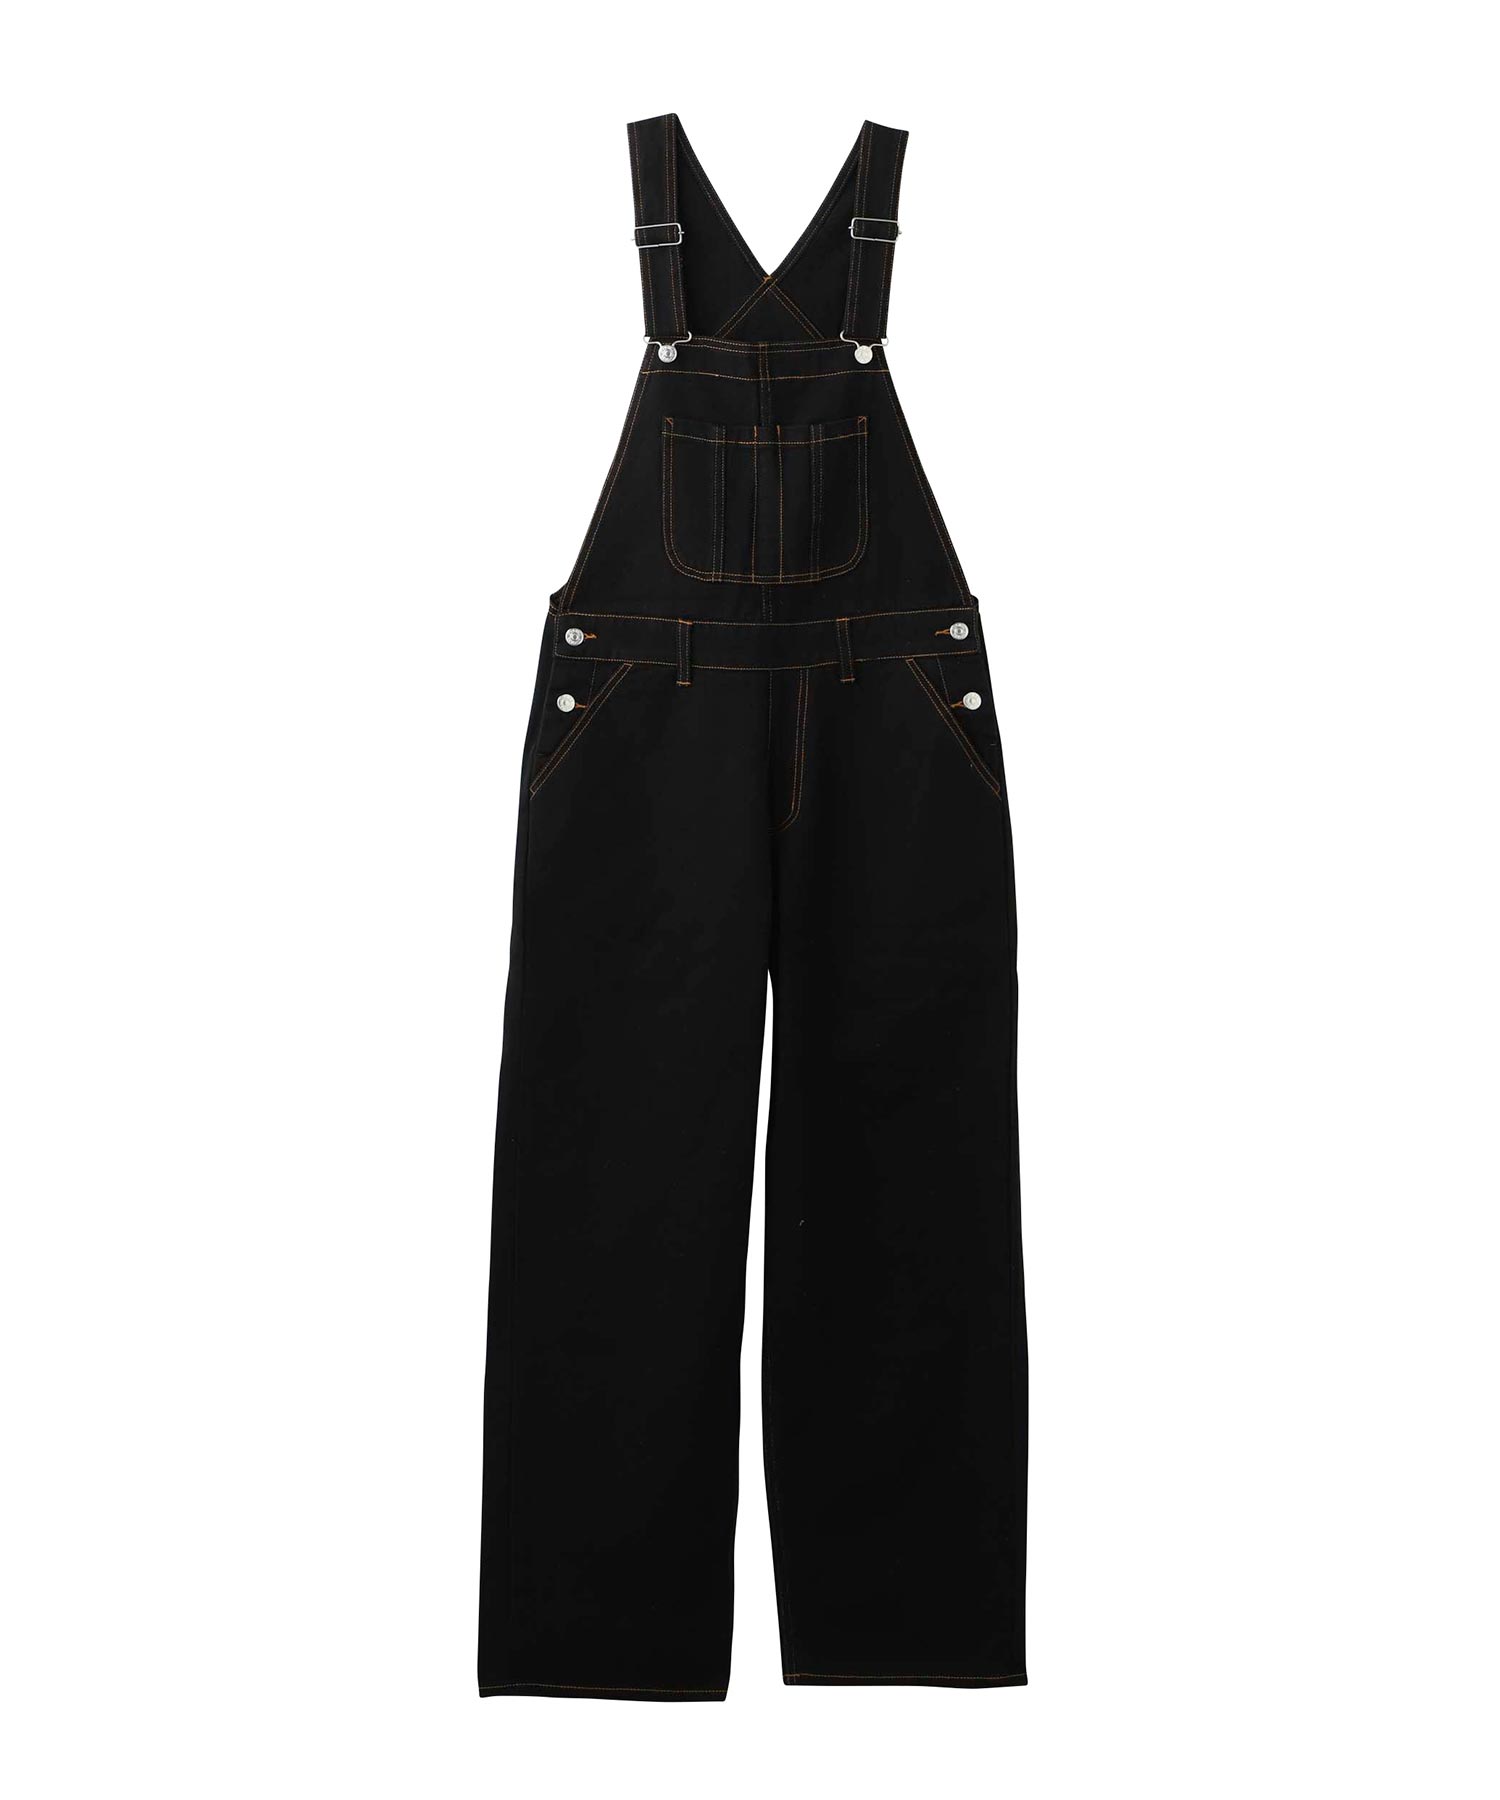 SALE セール 【公式】X-girl エックスガール WIDE TAPERED OVERALL オーバーオール サロペット つなぎ 無地 カラー |  XLARGE X-girl公式calif楽天市場店